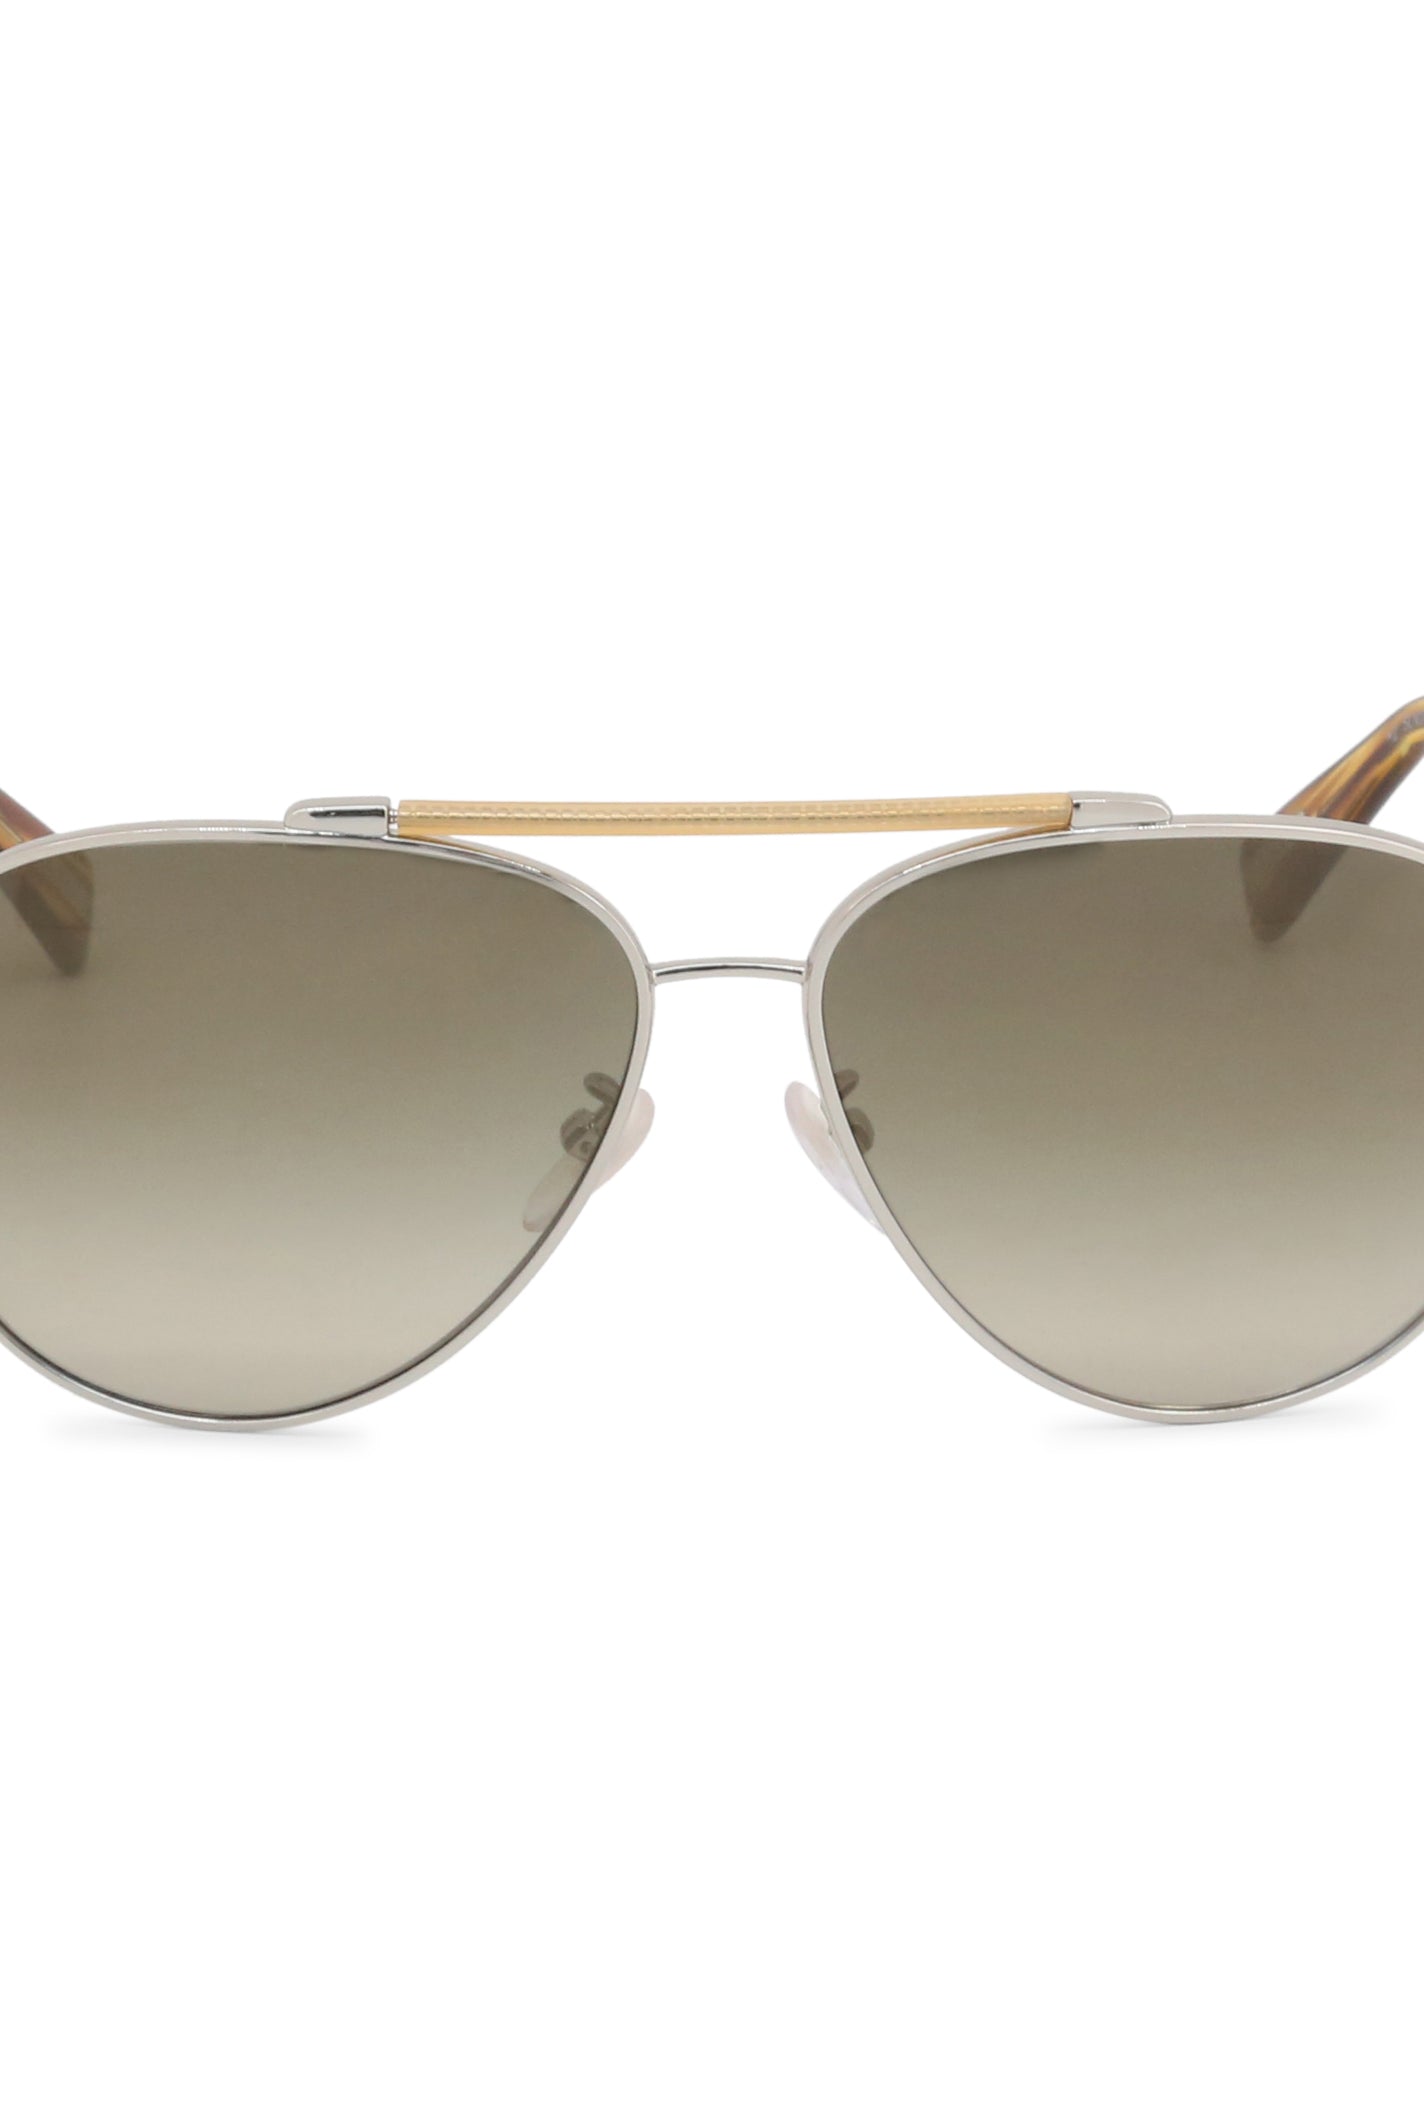 Lanvin - Silver & Natural Aviators - Lanvin - [product type] - Magpie Style